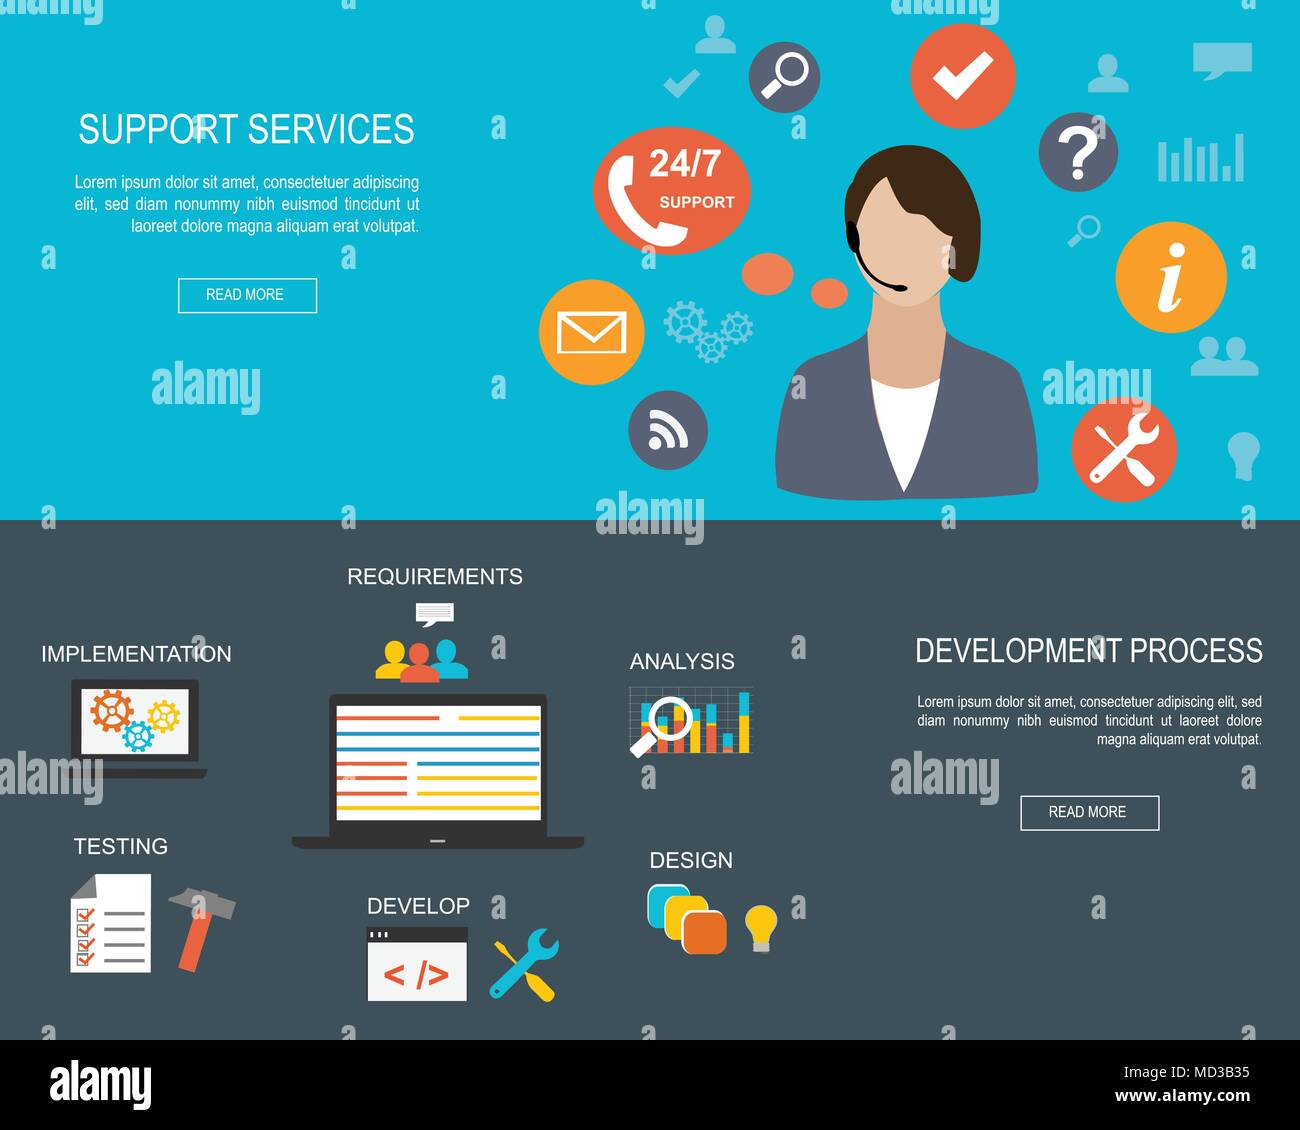 Flat designed banners for Support Services and for Development Process Stock Vector